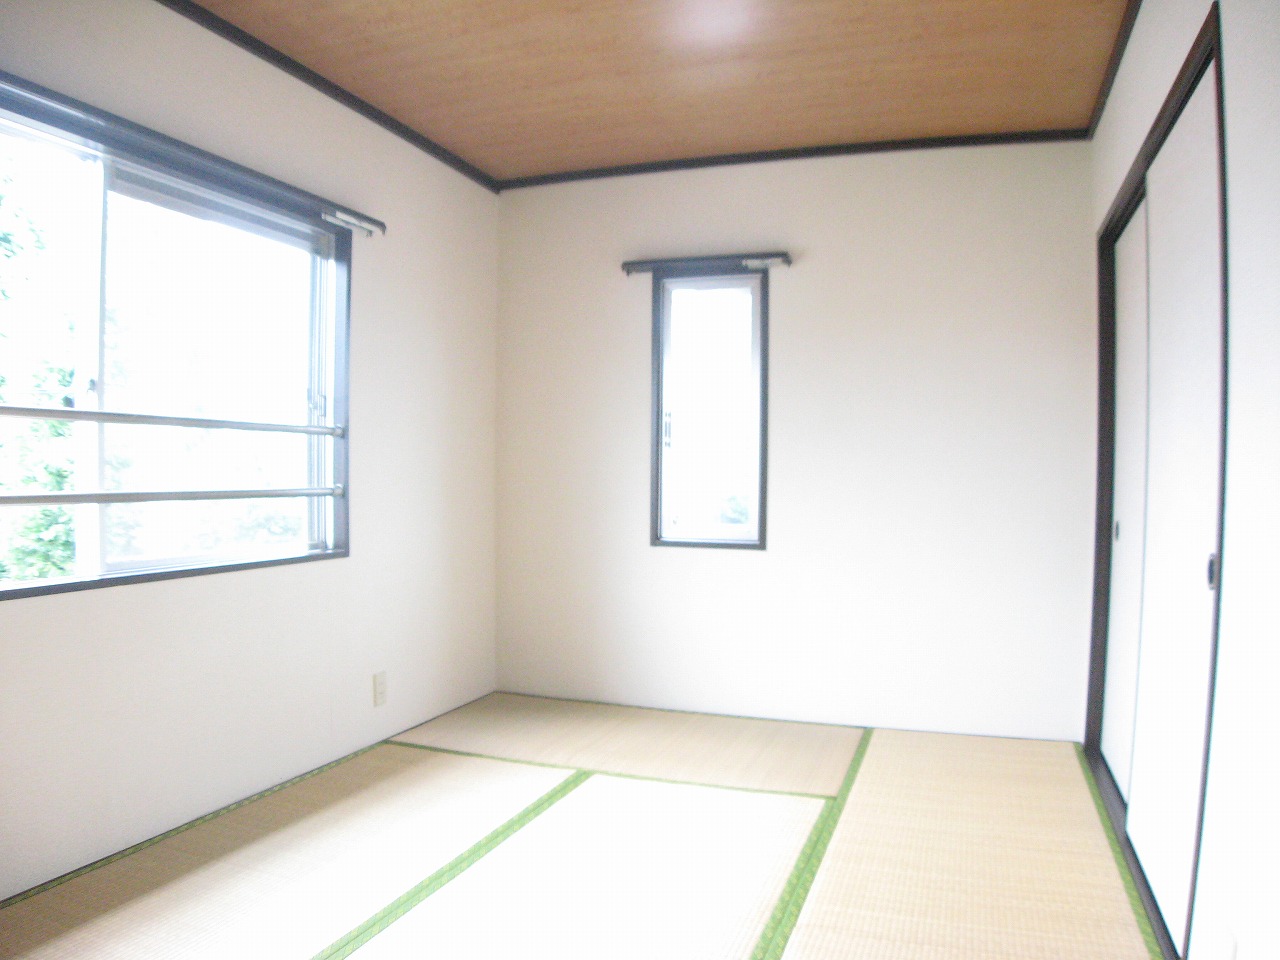 Other room space. There is a closet in the intimate Japanese-style room